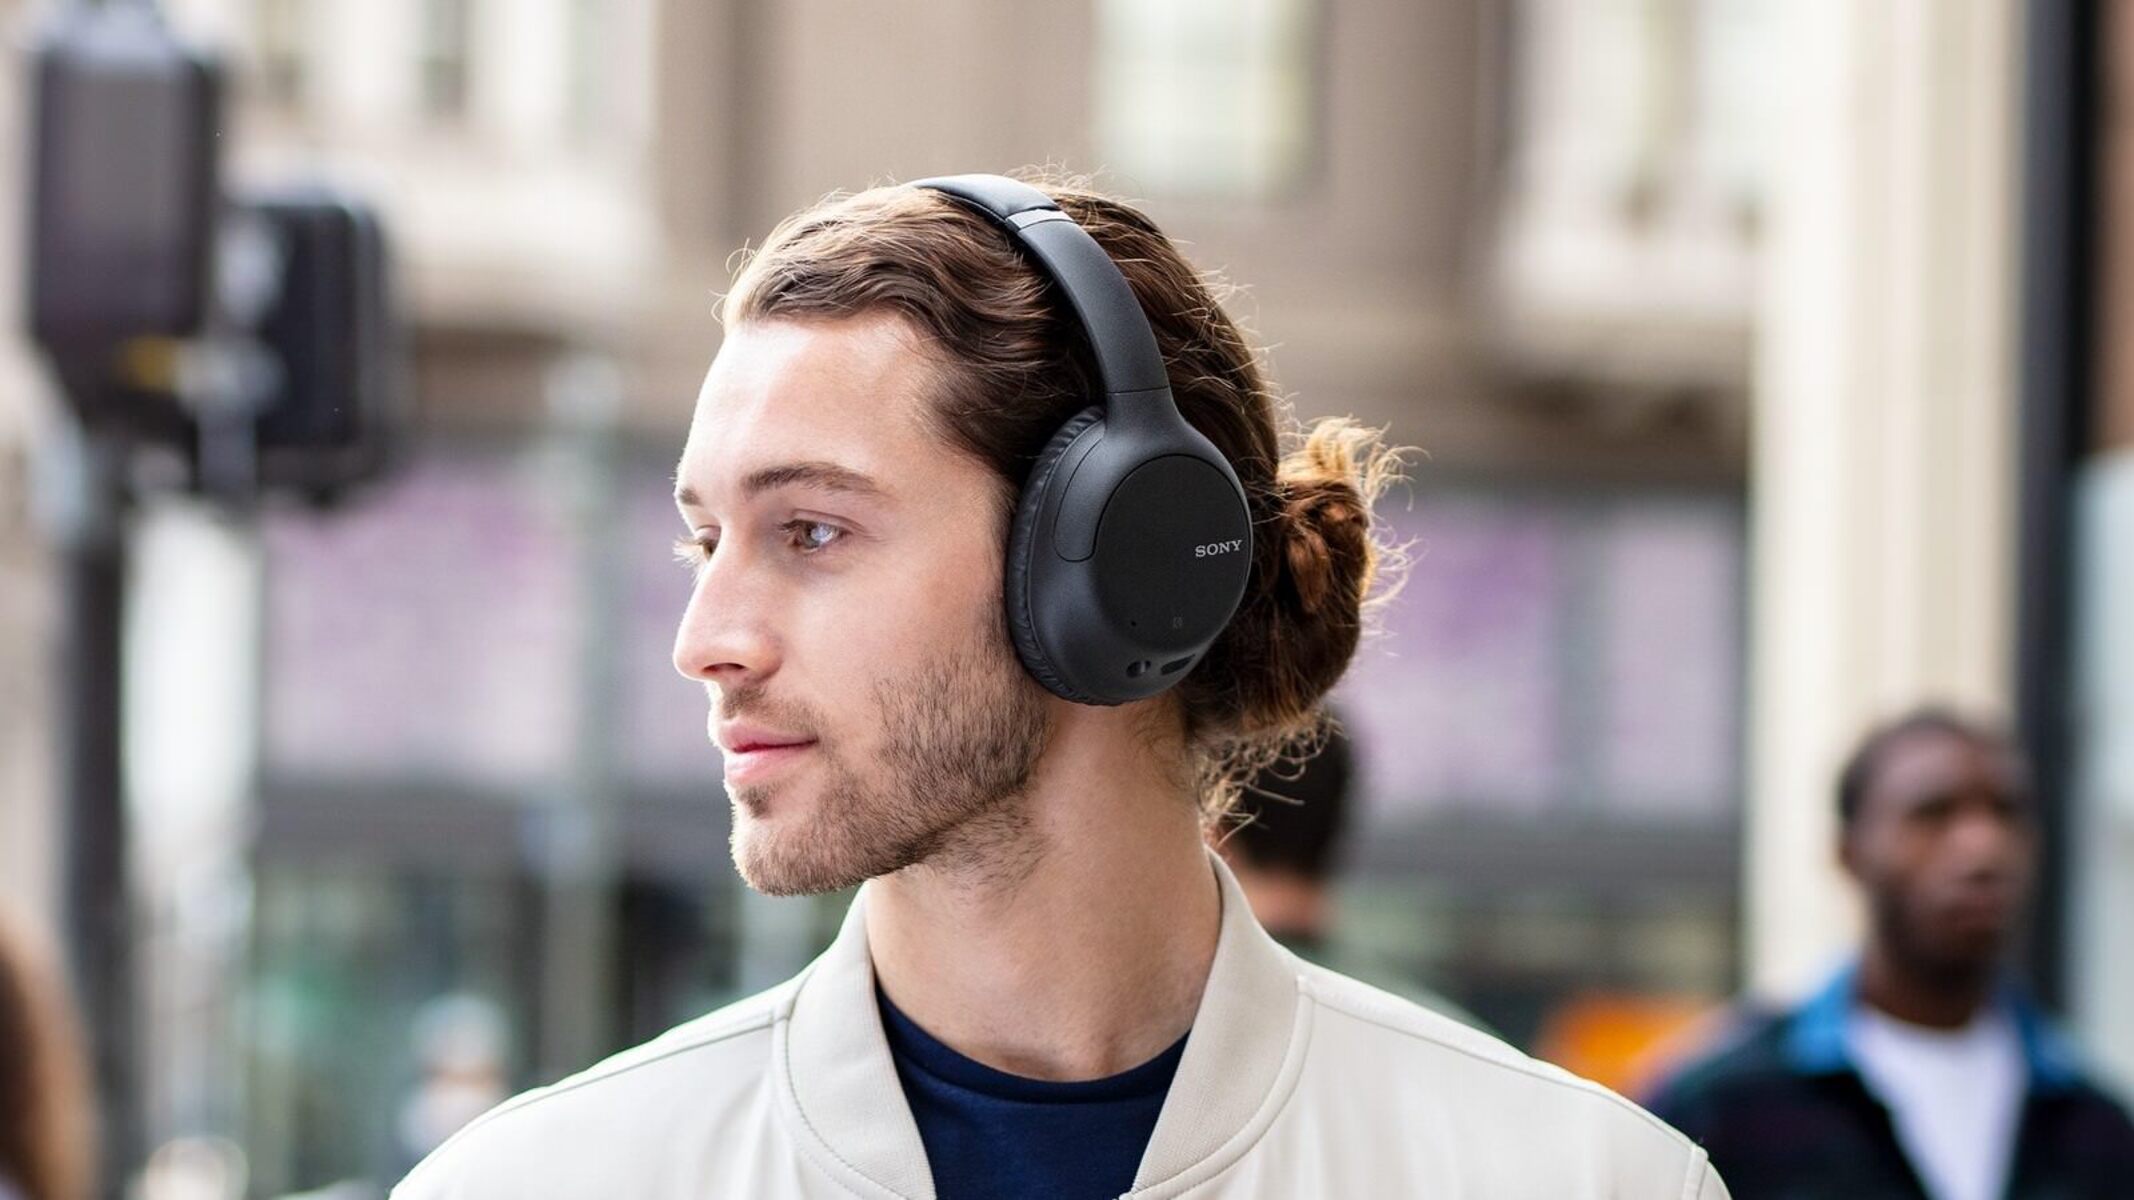 How To Make Headphones Noise Cancelling